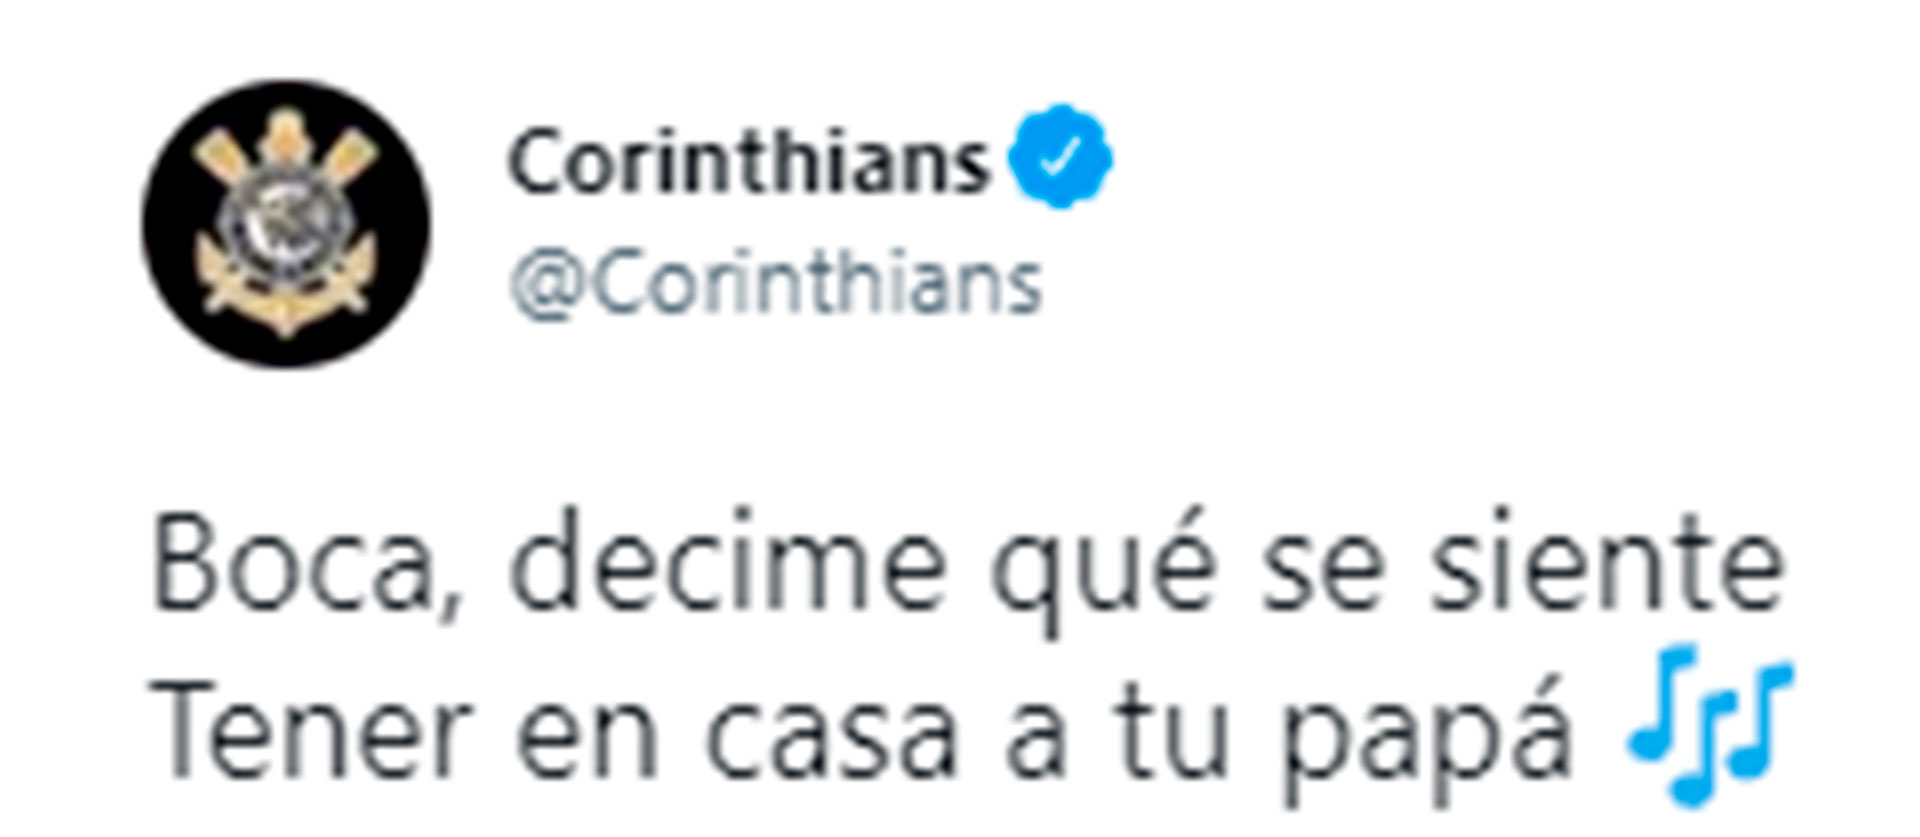 Corinthians recalled the song that Argentine fans performed at the 2014 World Cup